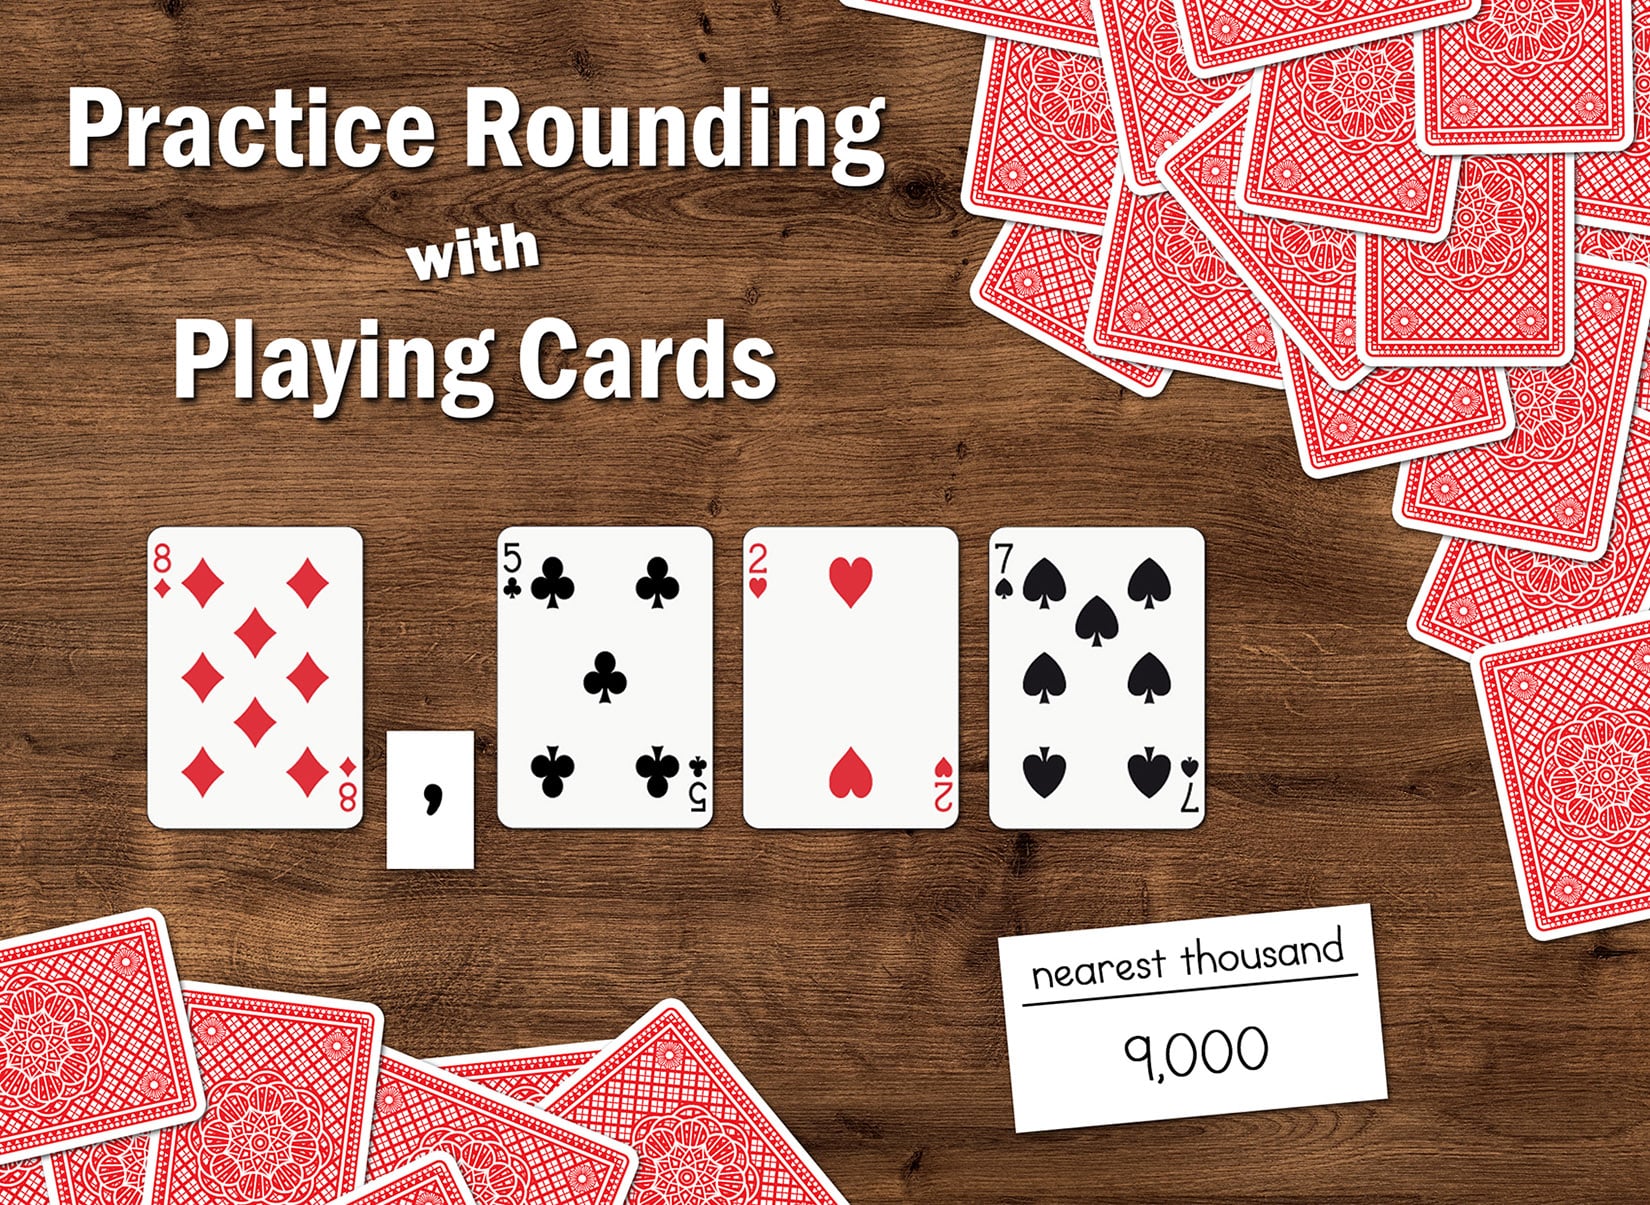 Play a Rounding Game with a Deck of Cards 